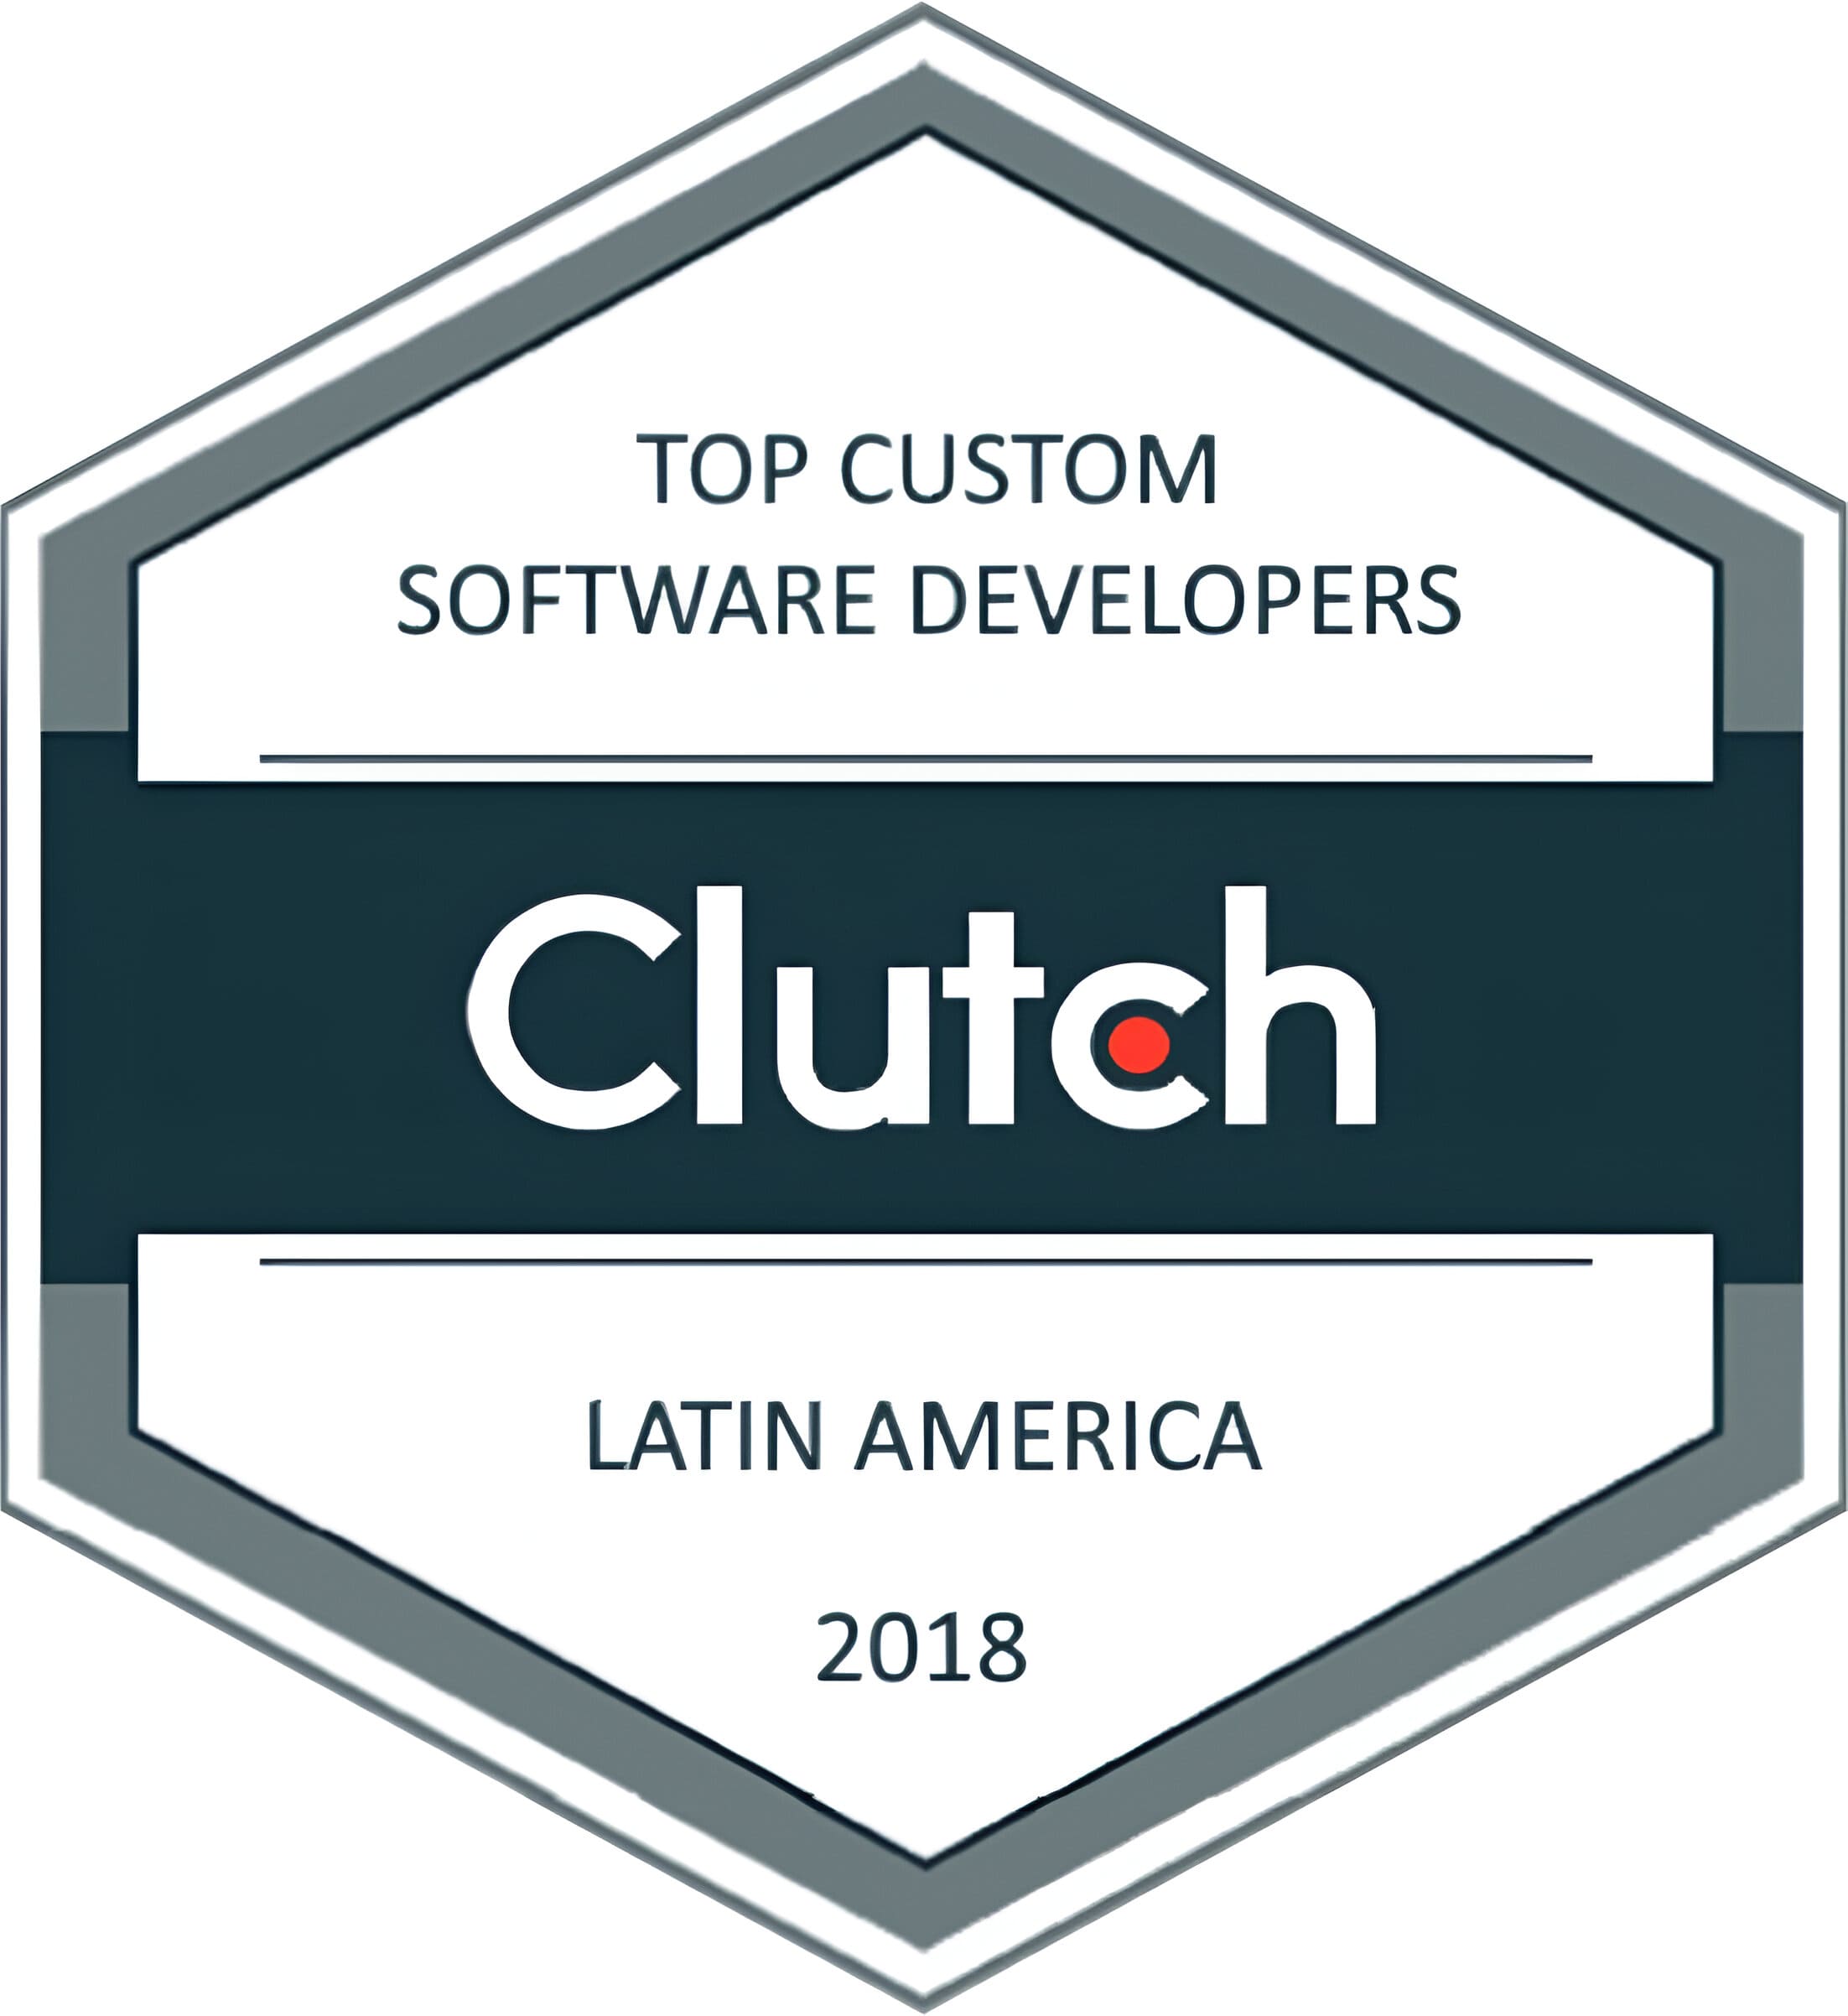 Clutch Badge of Top Custom Software Developers in Latin America Awards, for Kaizen Softworks